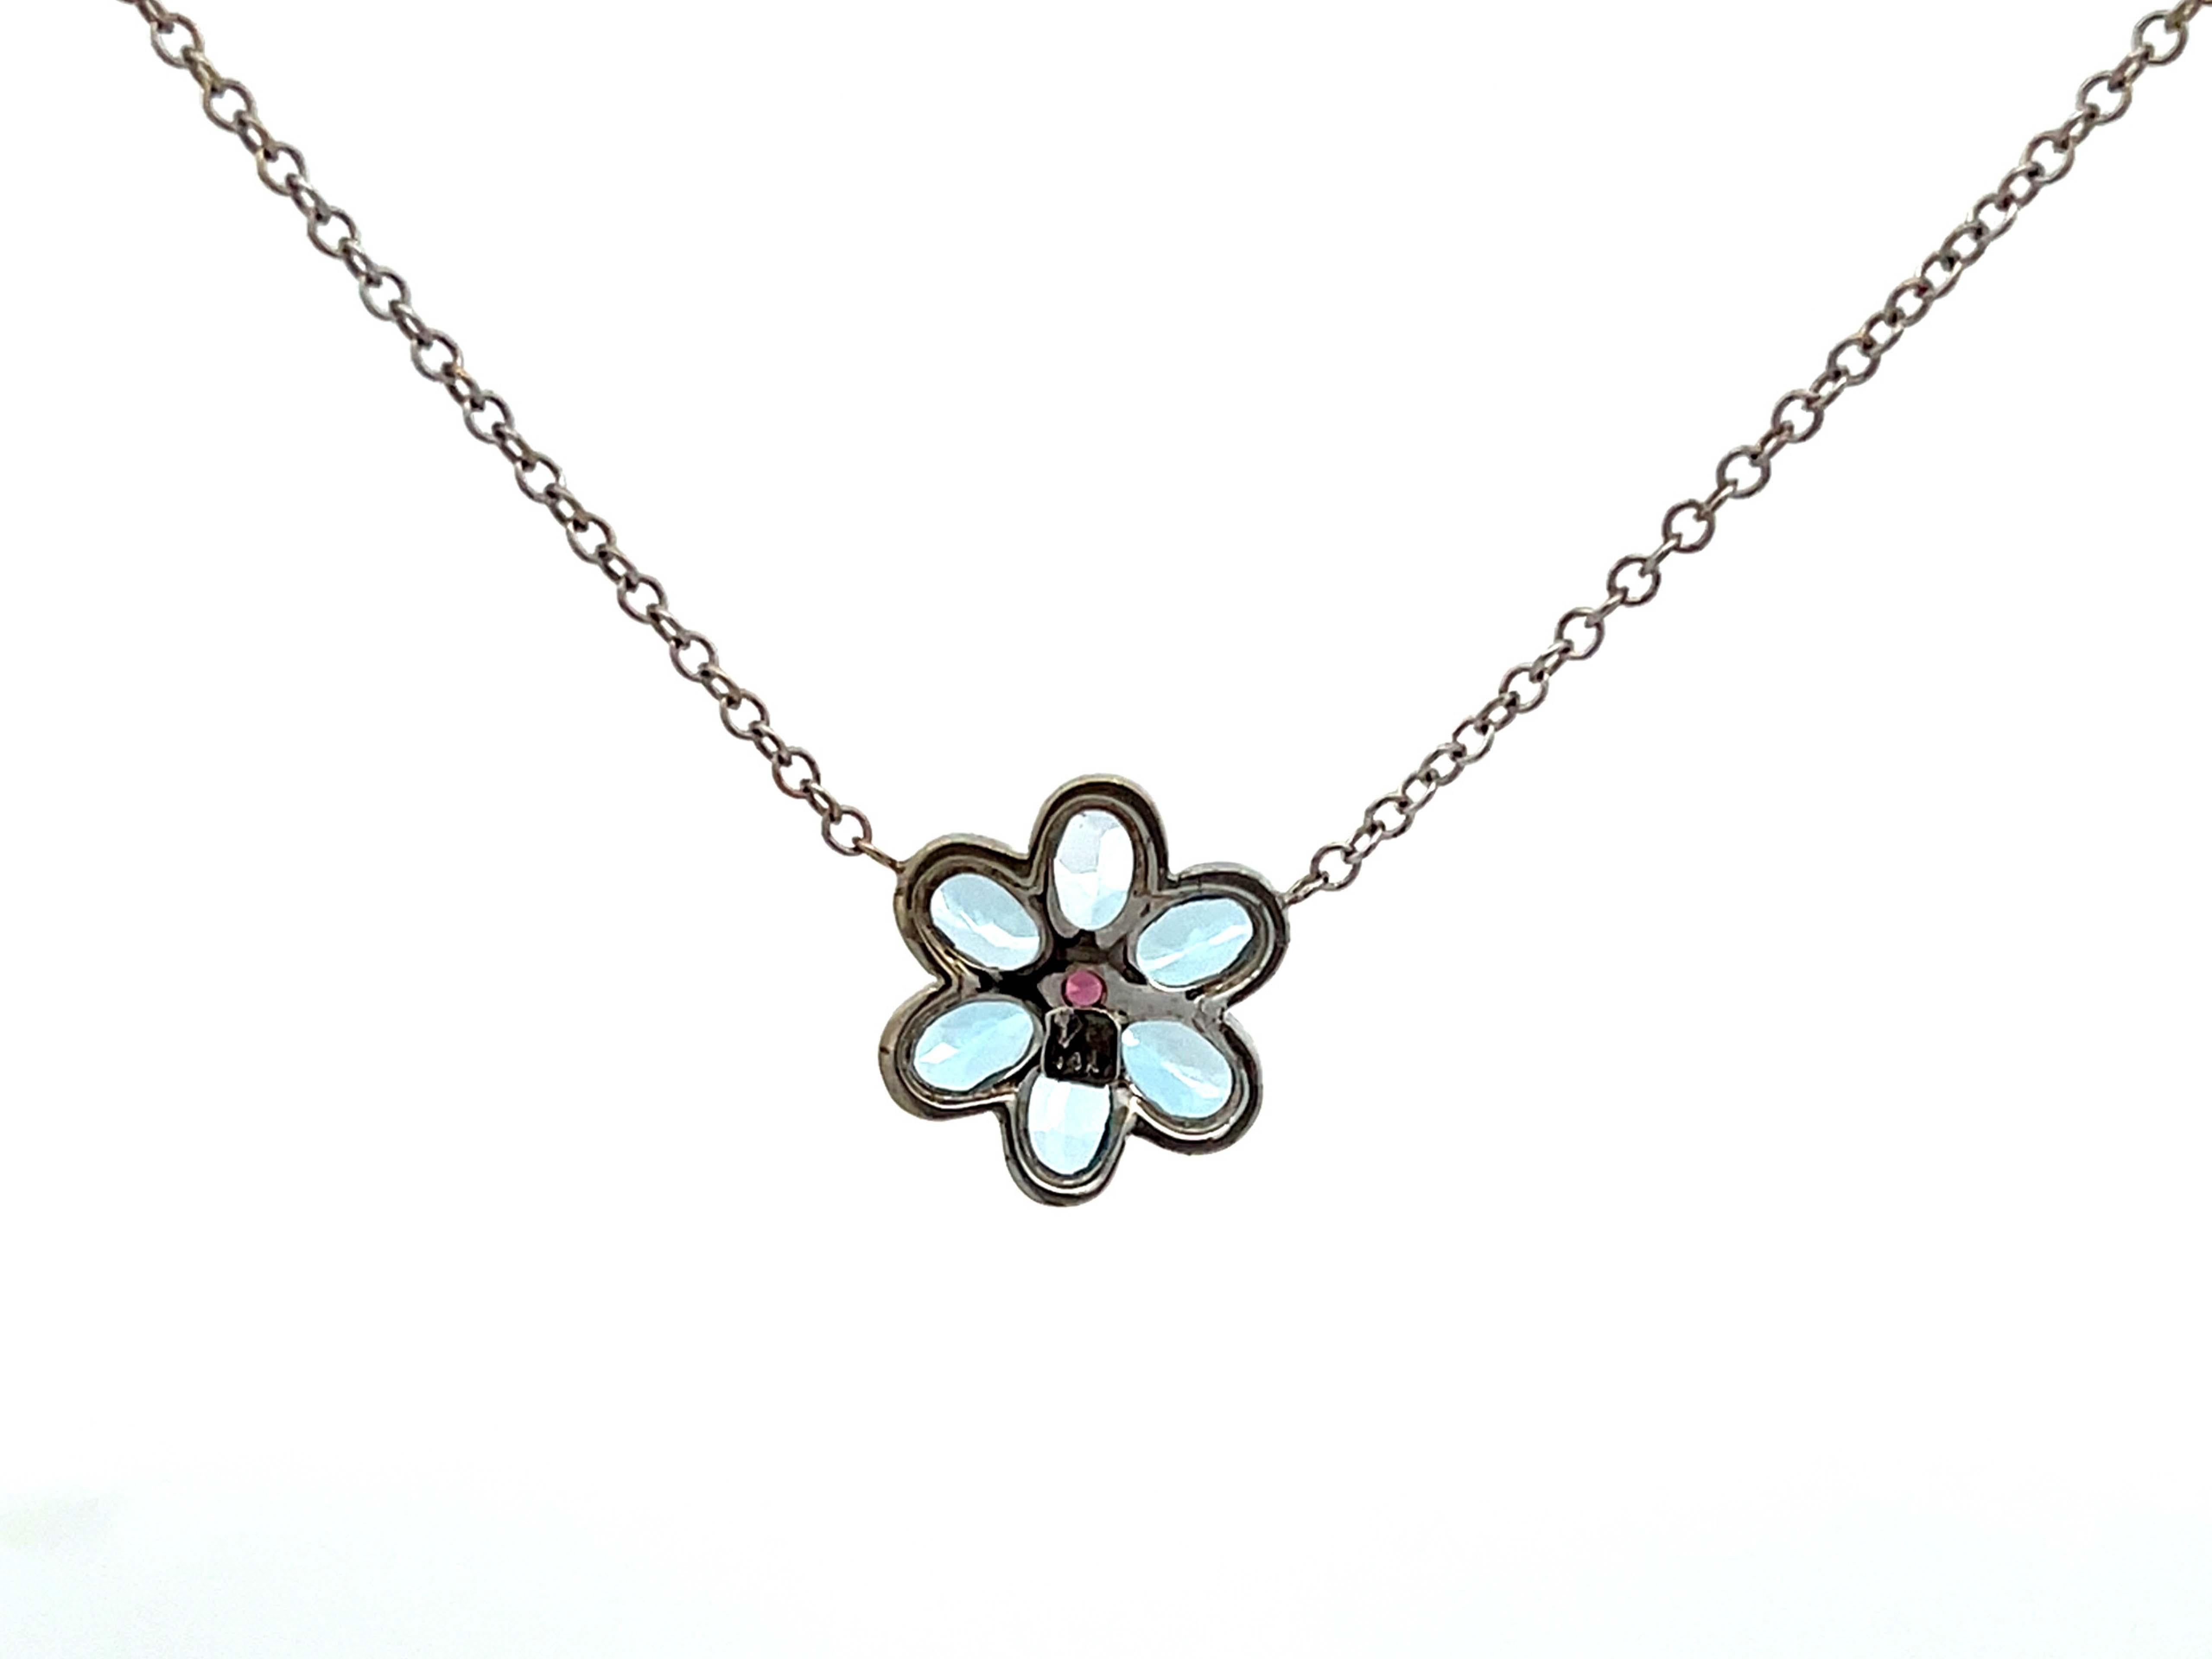 Blue Topaz and Pink Tourmaline Flower Necklace in 14k White Gold In Excellent Condition For Sale In Honolulu, HI